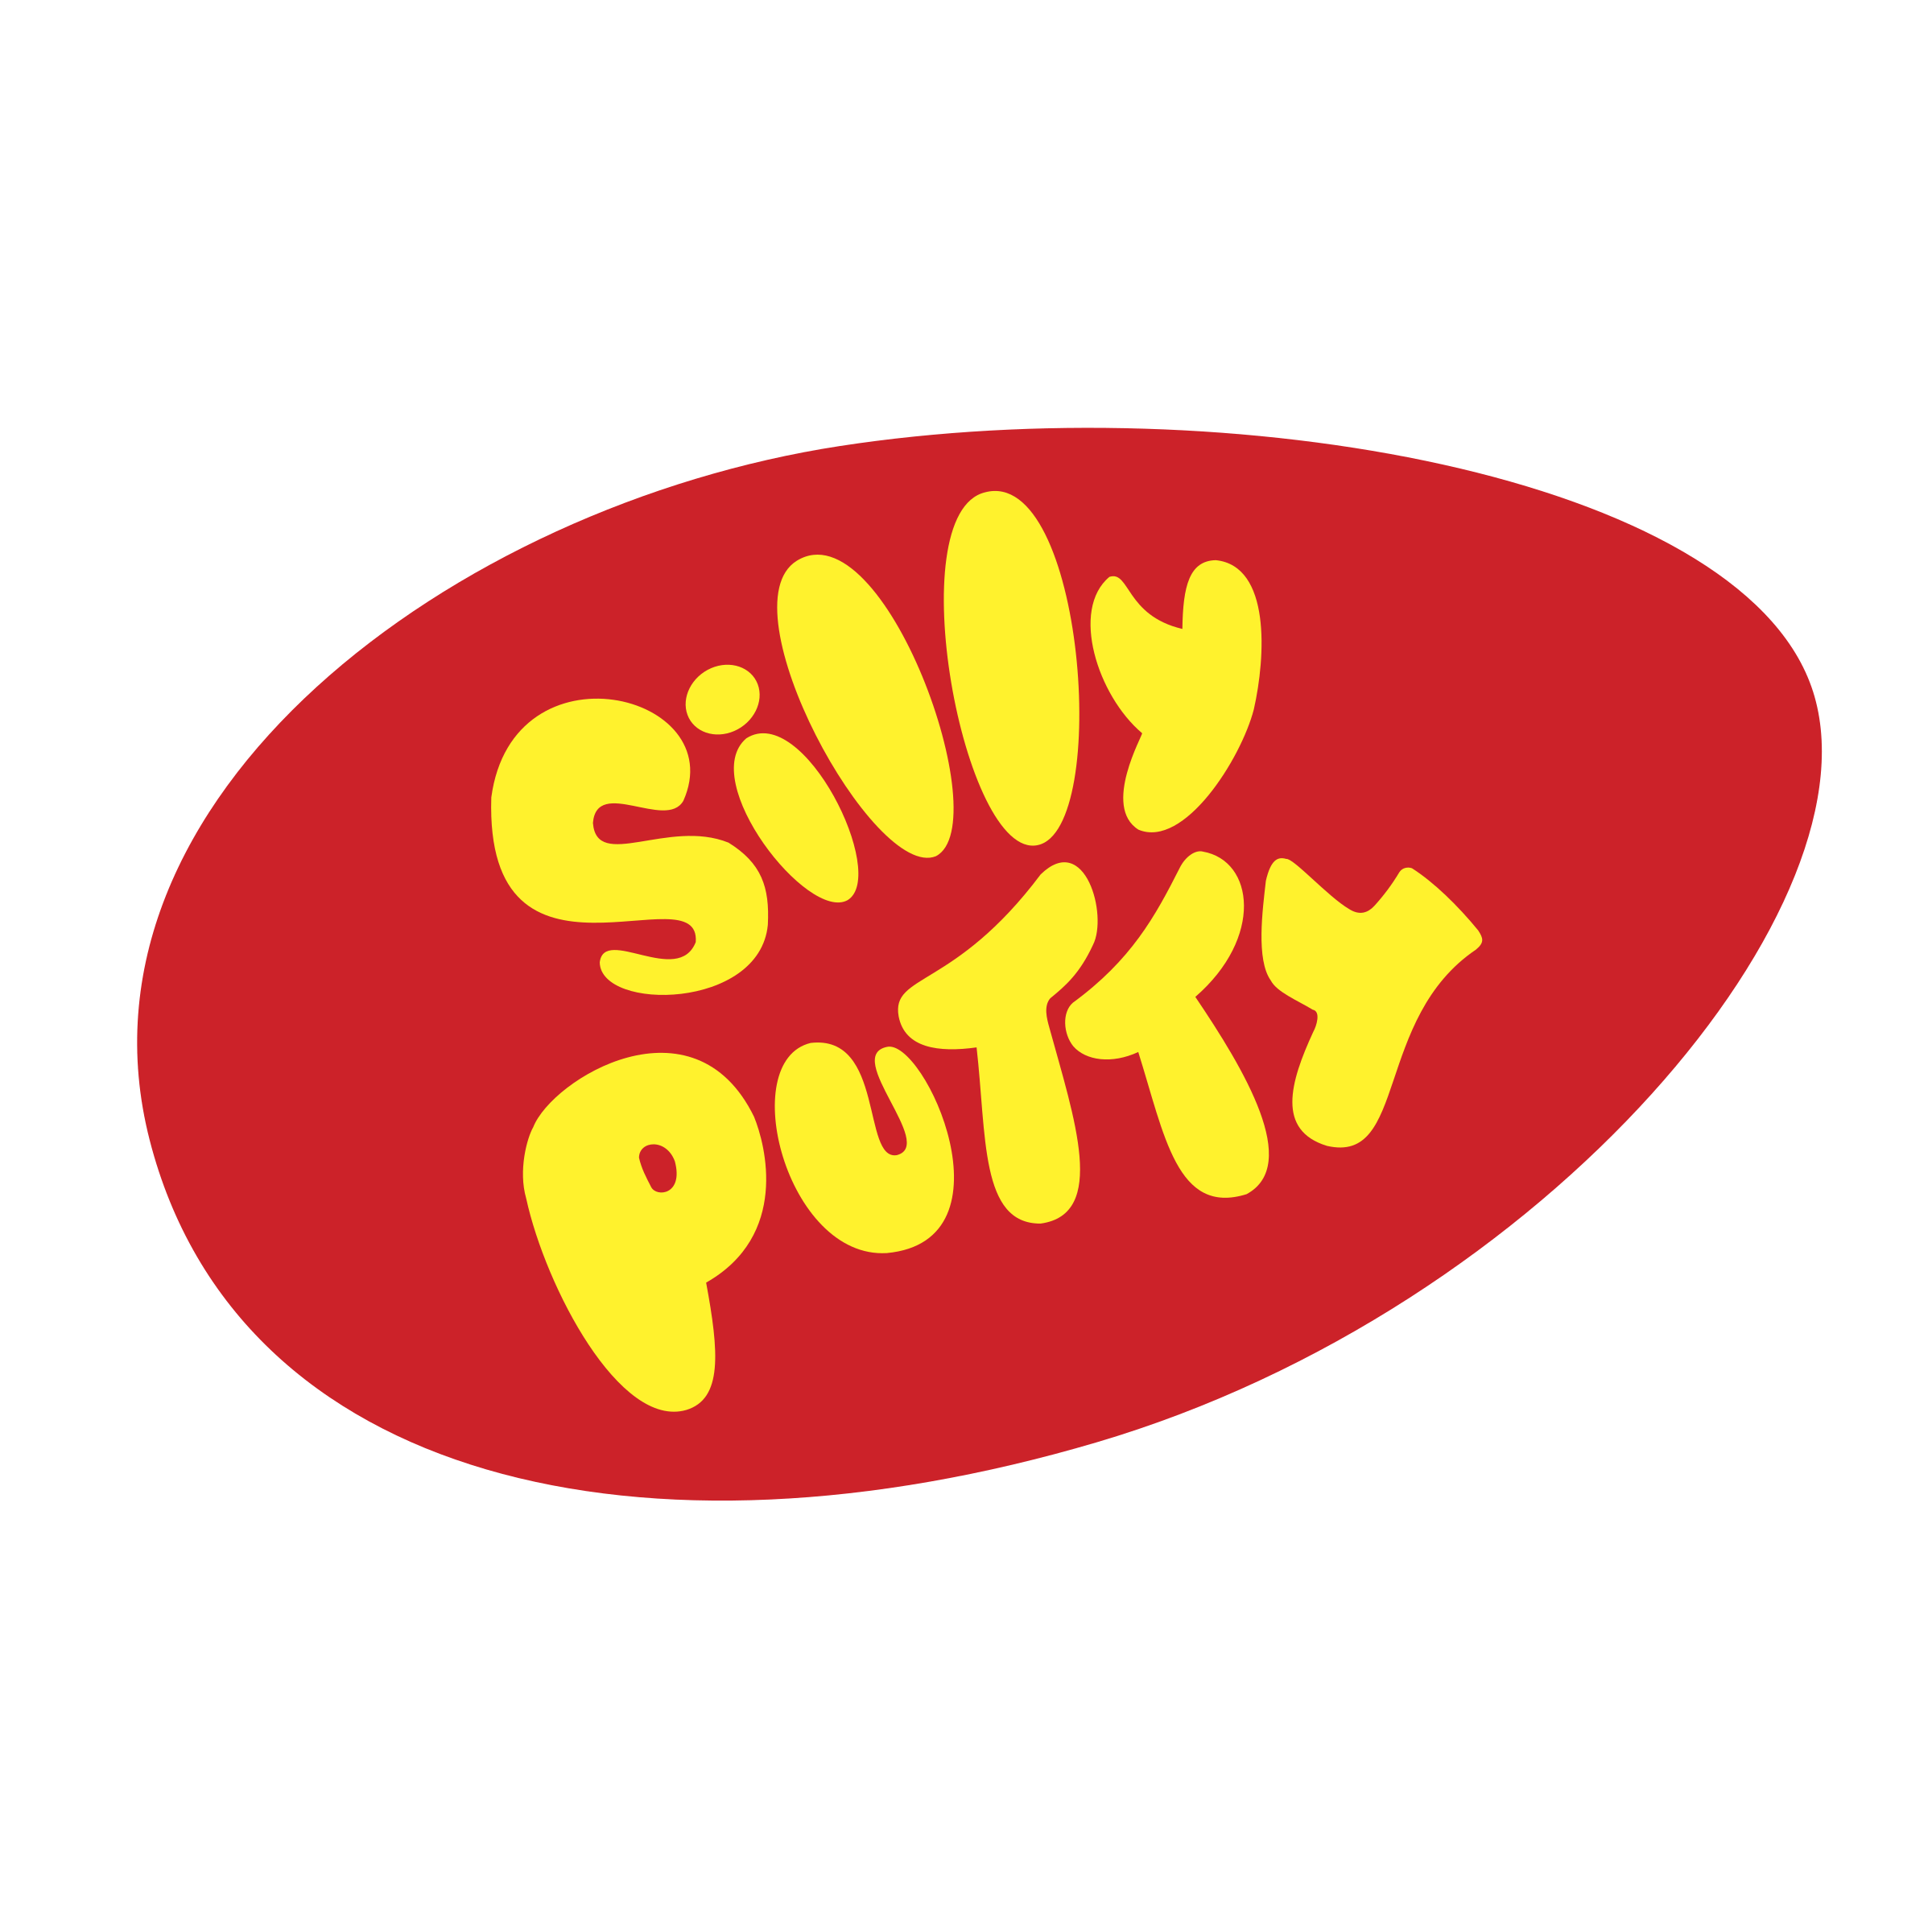 Putty Logo - Silly Putty Logo PNG Transparent & SVG Vector - Freebie Supply